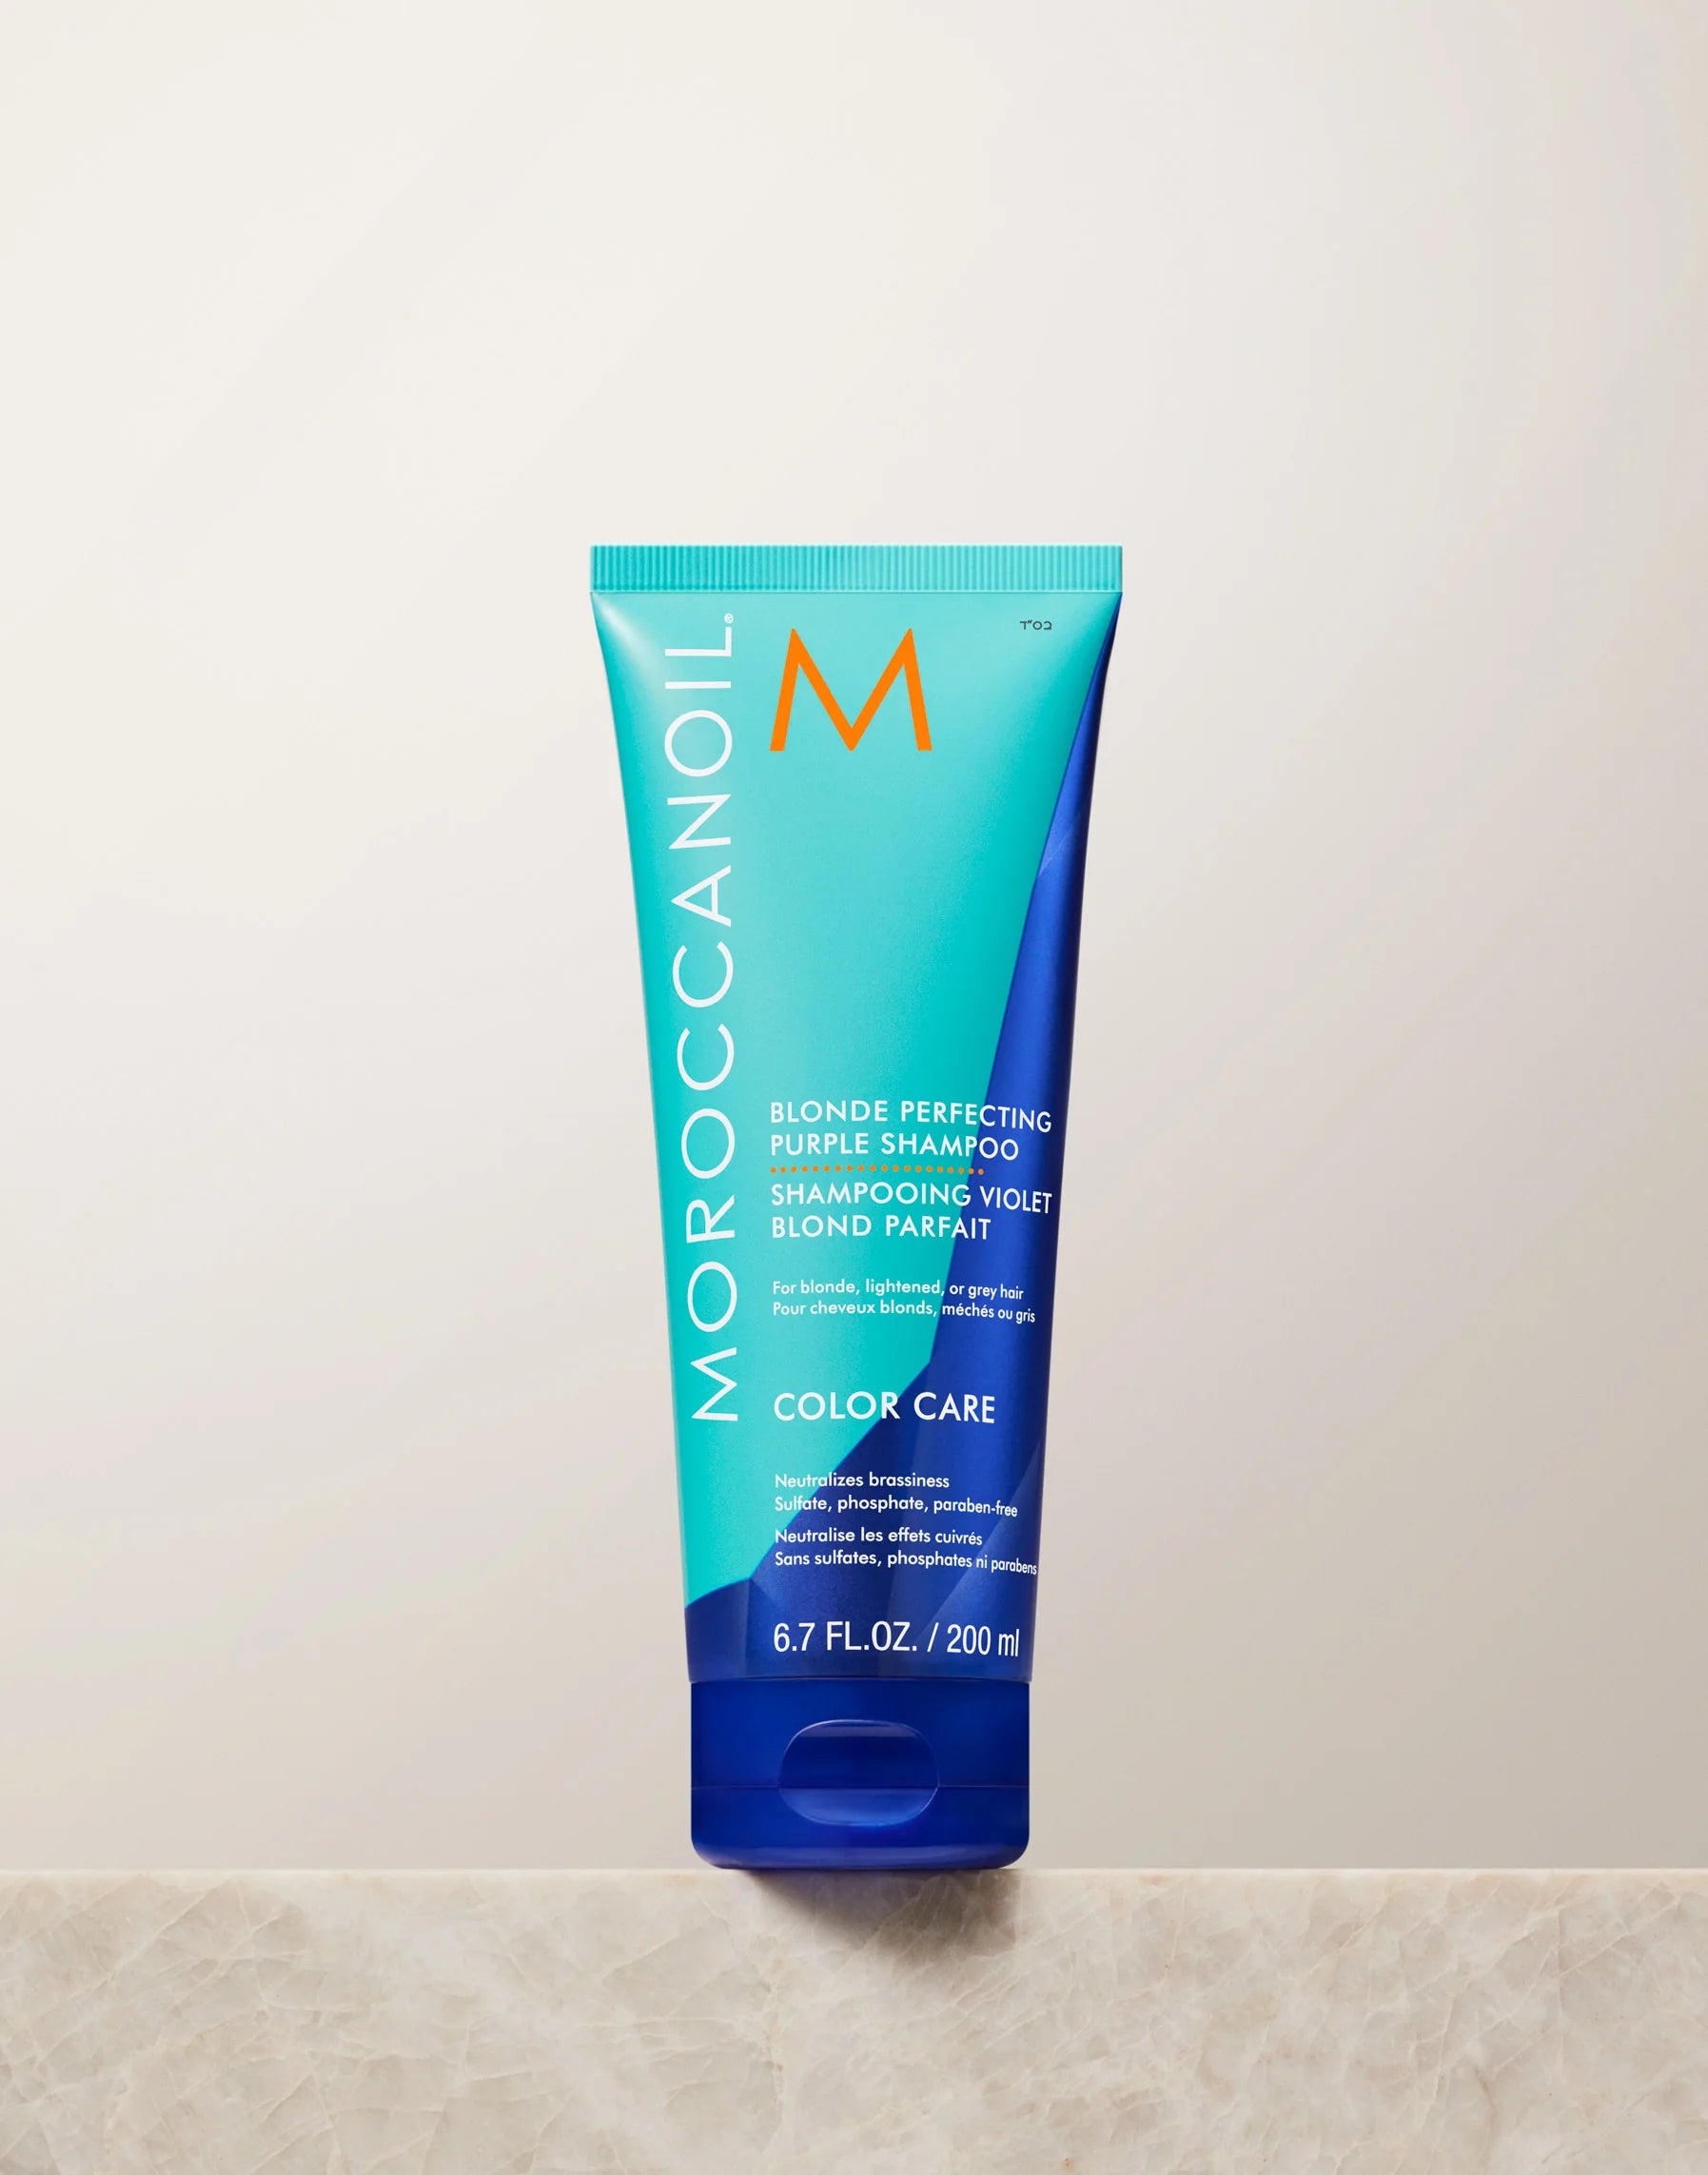 Toning shampoo for blondes (MoroccanOil Blonde Perfecting Purple Shampoo)